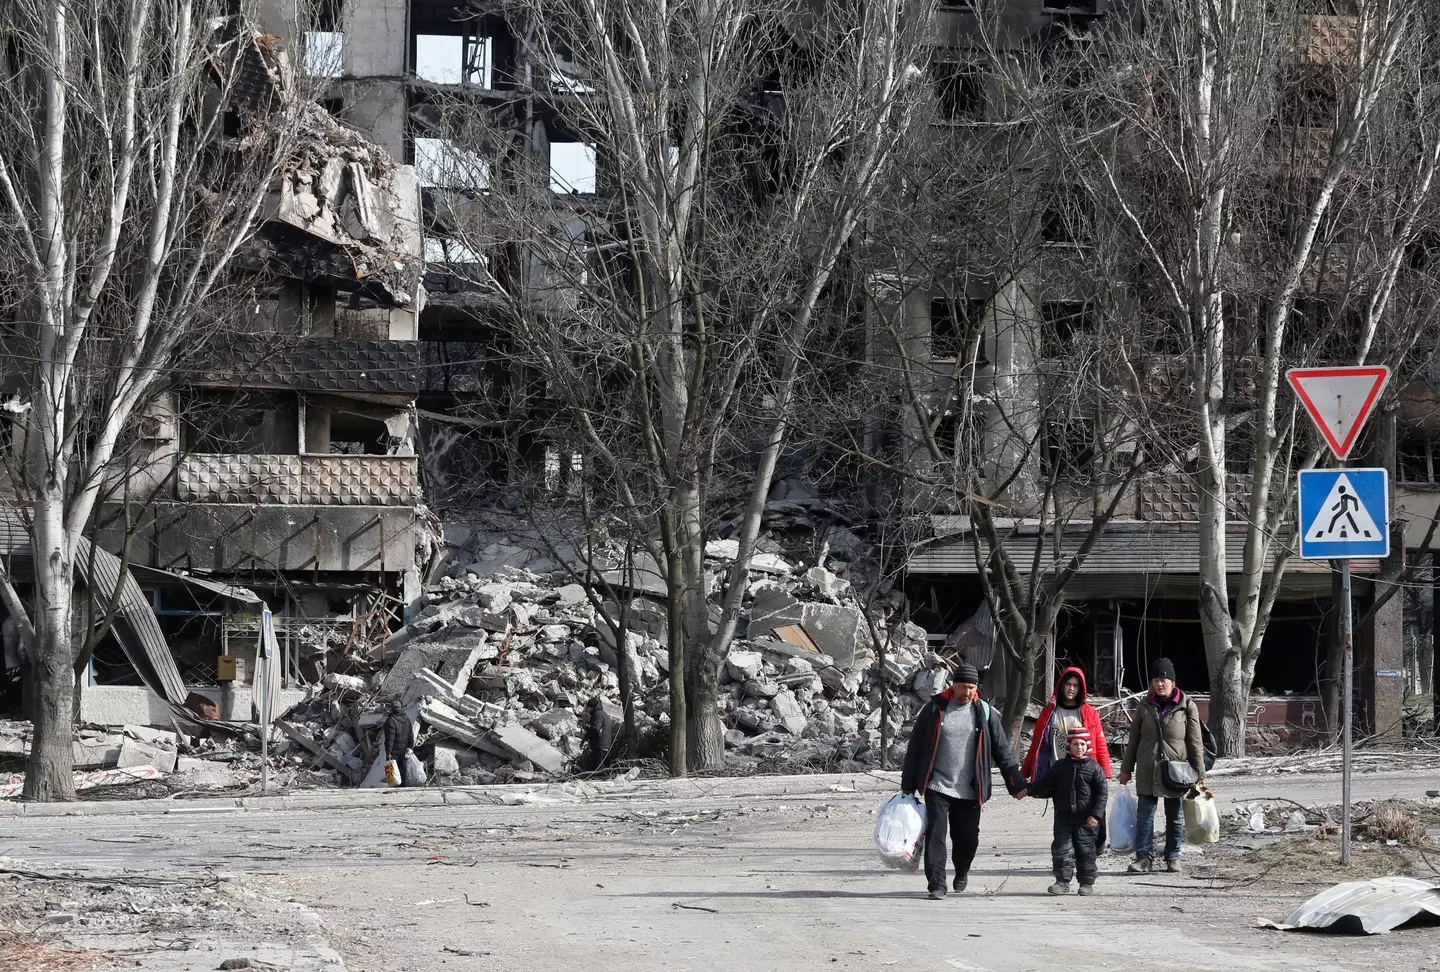 Local residents walk past an apartment building destroyed during Ukraine-Russia conflict in the besieged southern port city of Mariupol, Ukraine March 31, 2022.